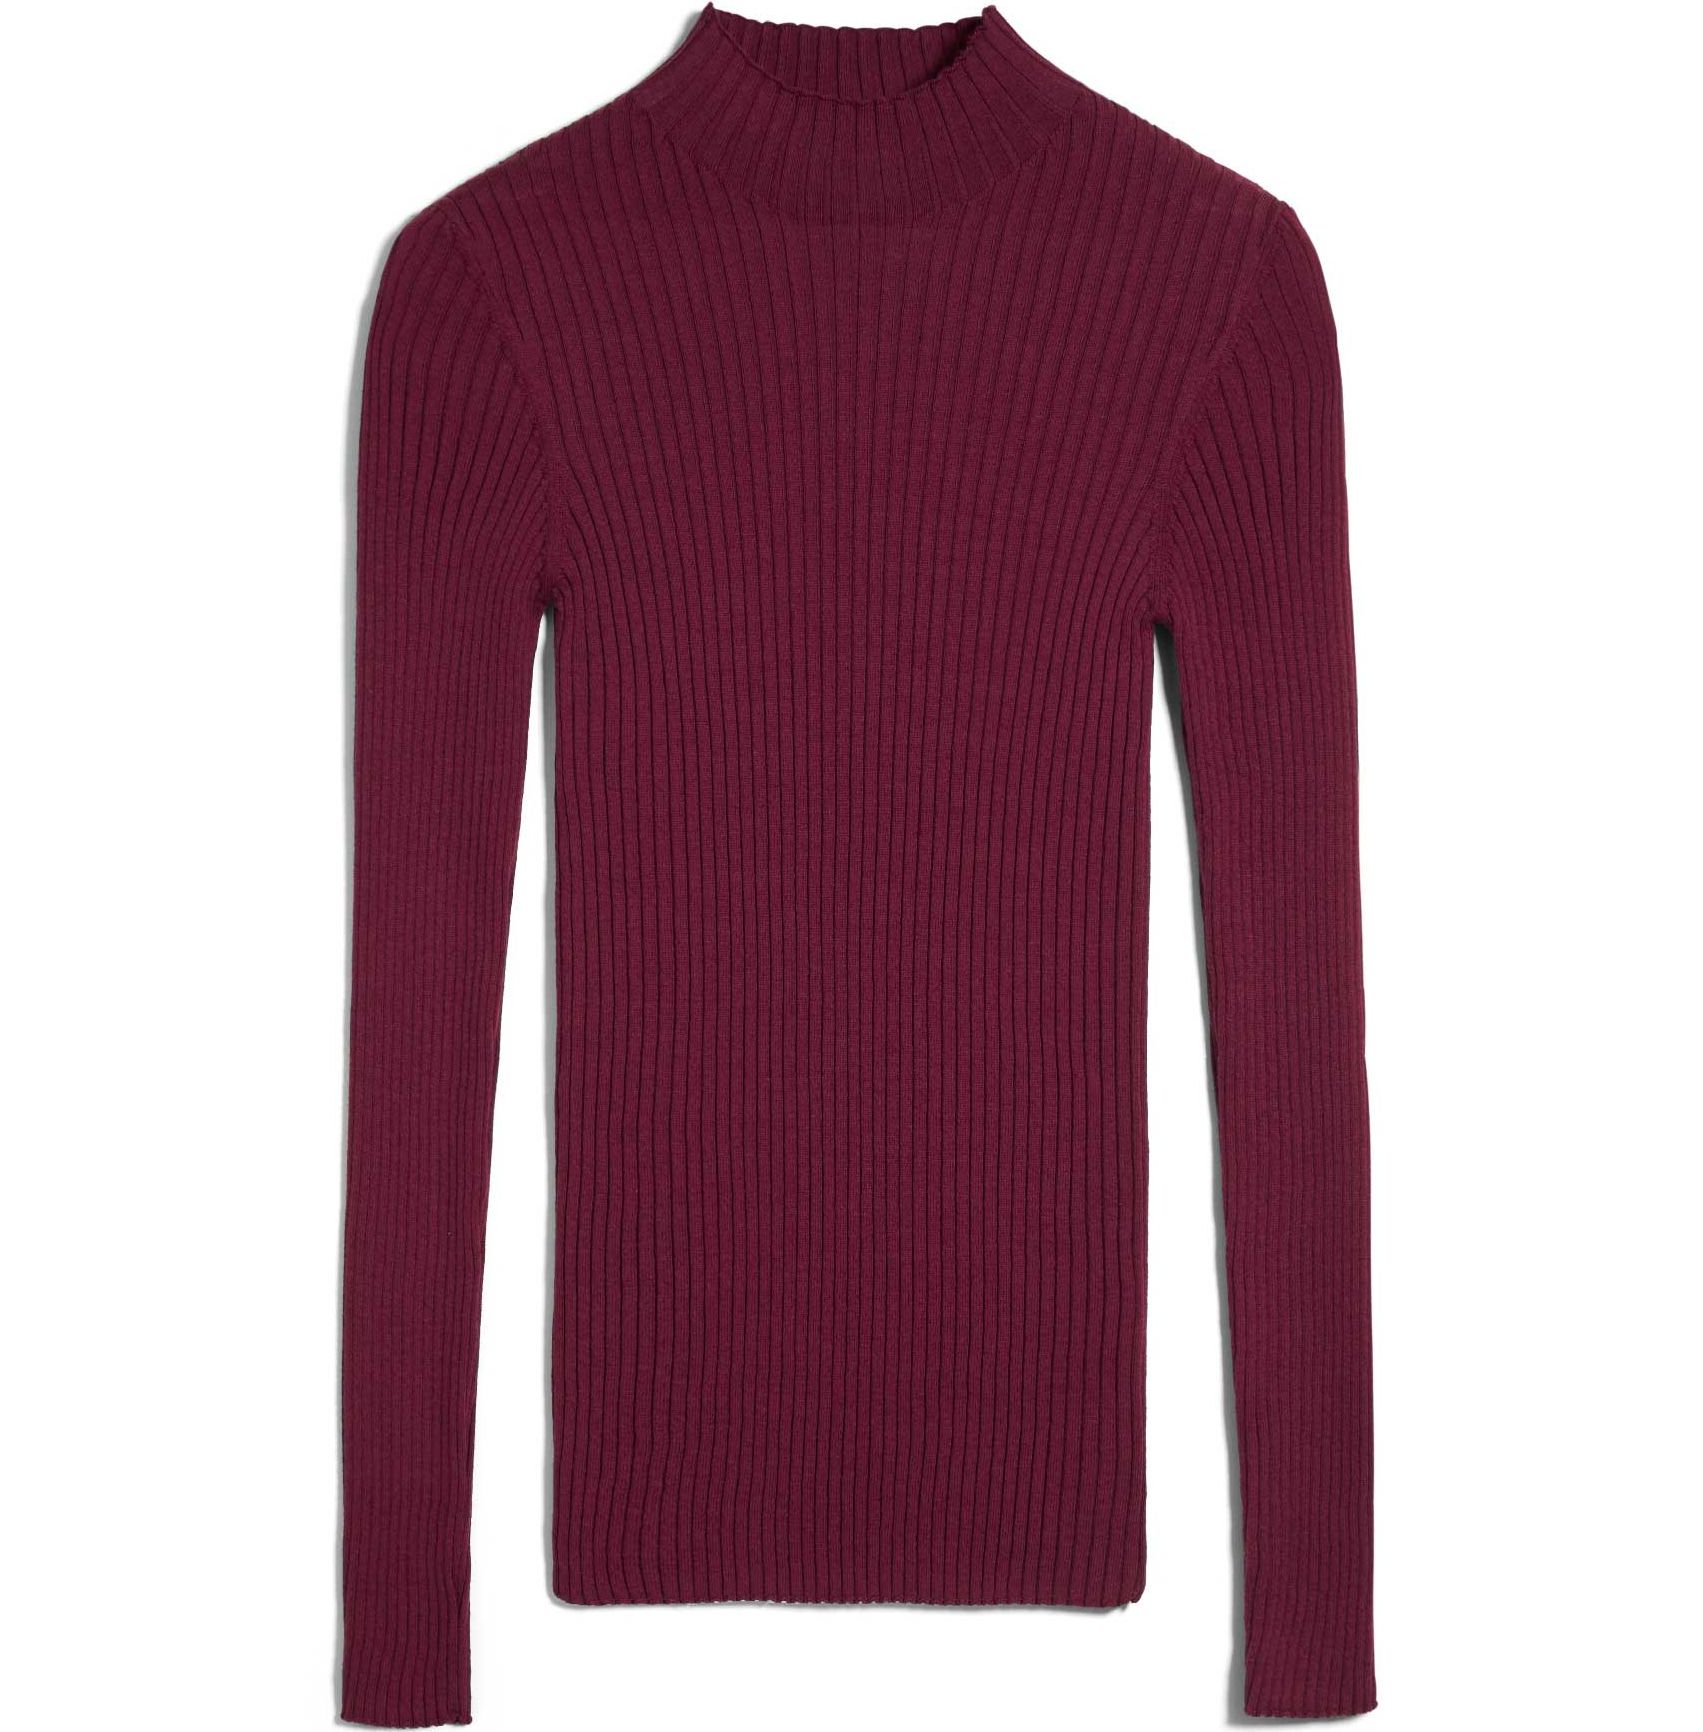 Damen-Pullover ALAANI ruby red